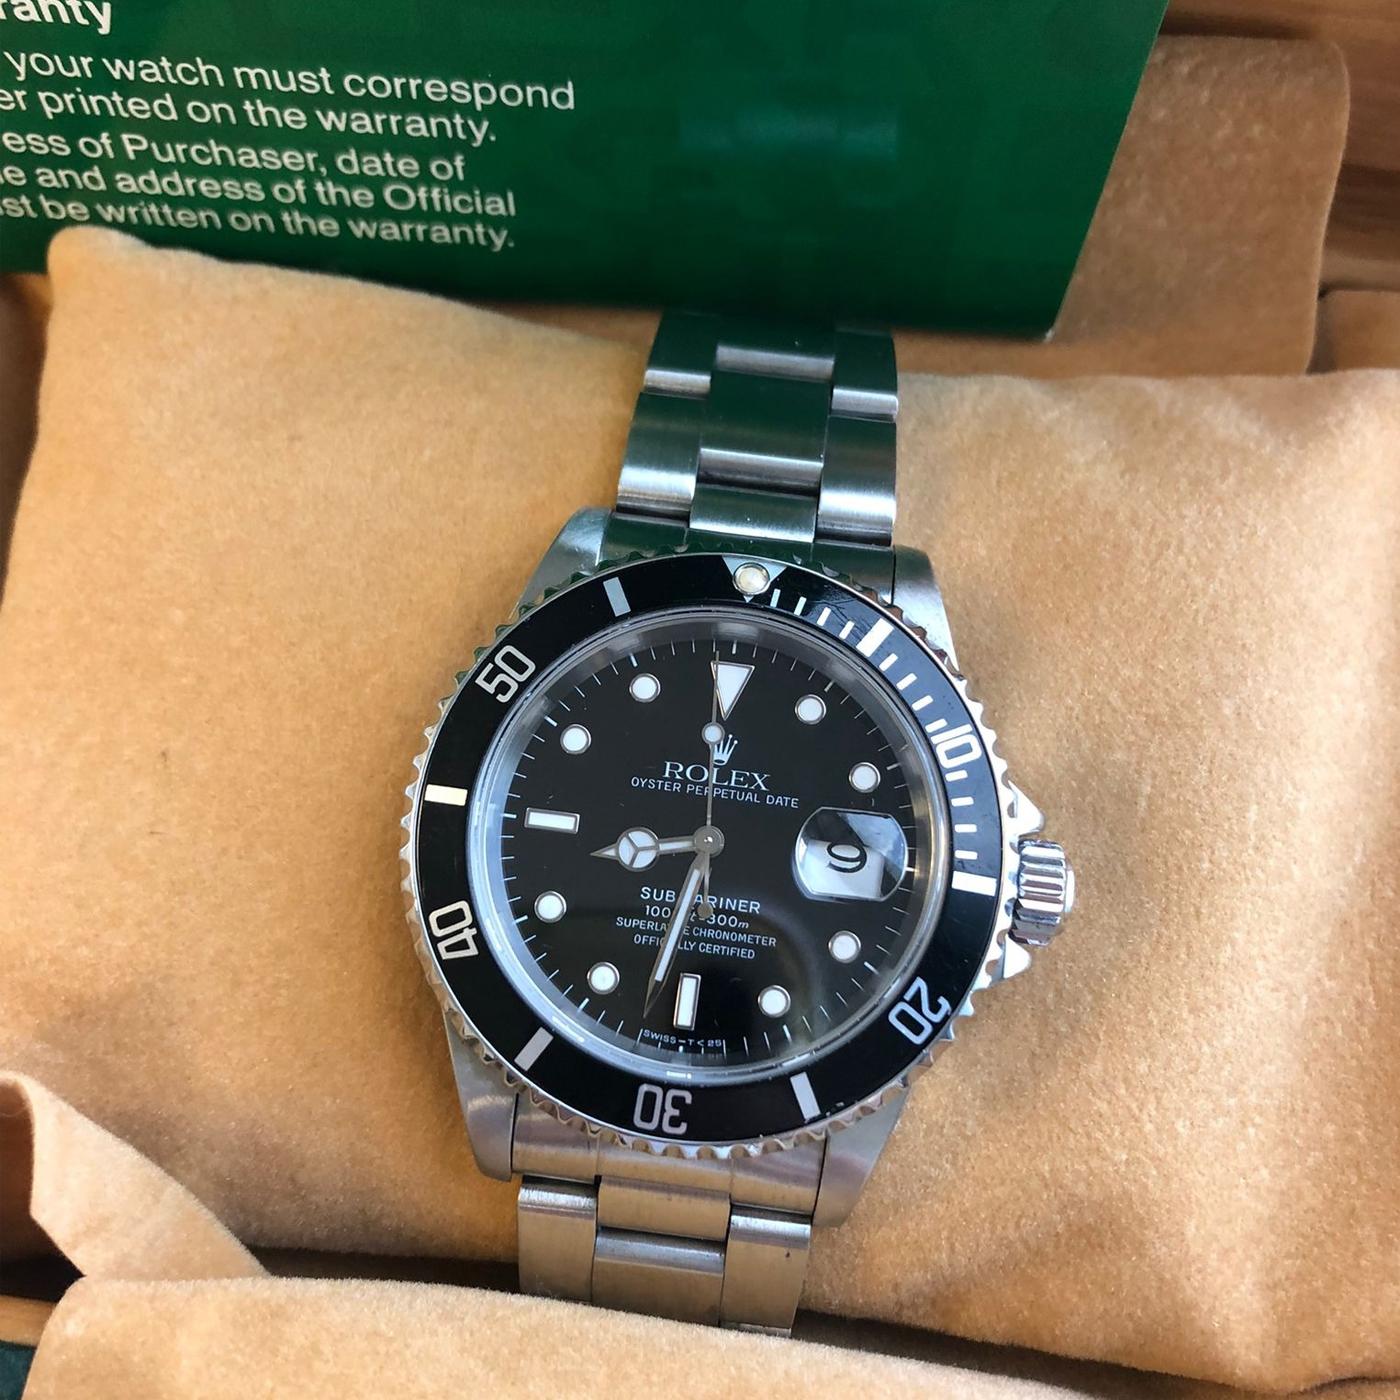 Rolex Submariner Date 40mm Black Dial Stainless Steel Oyster Watch 16610 For Sale 4